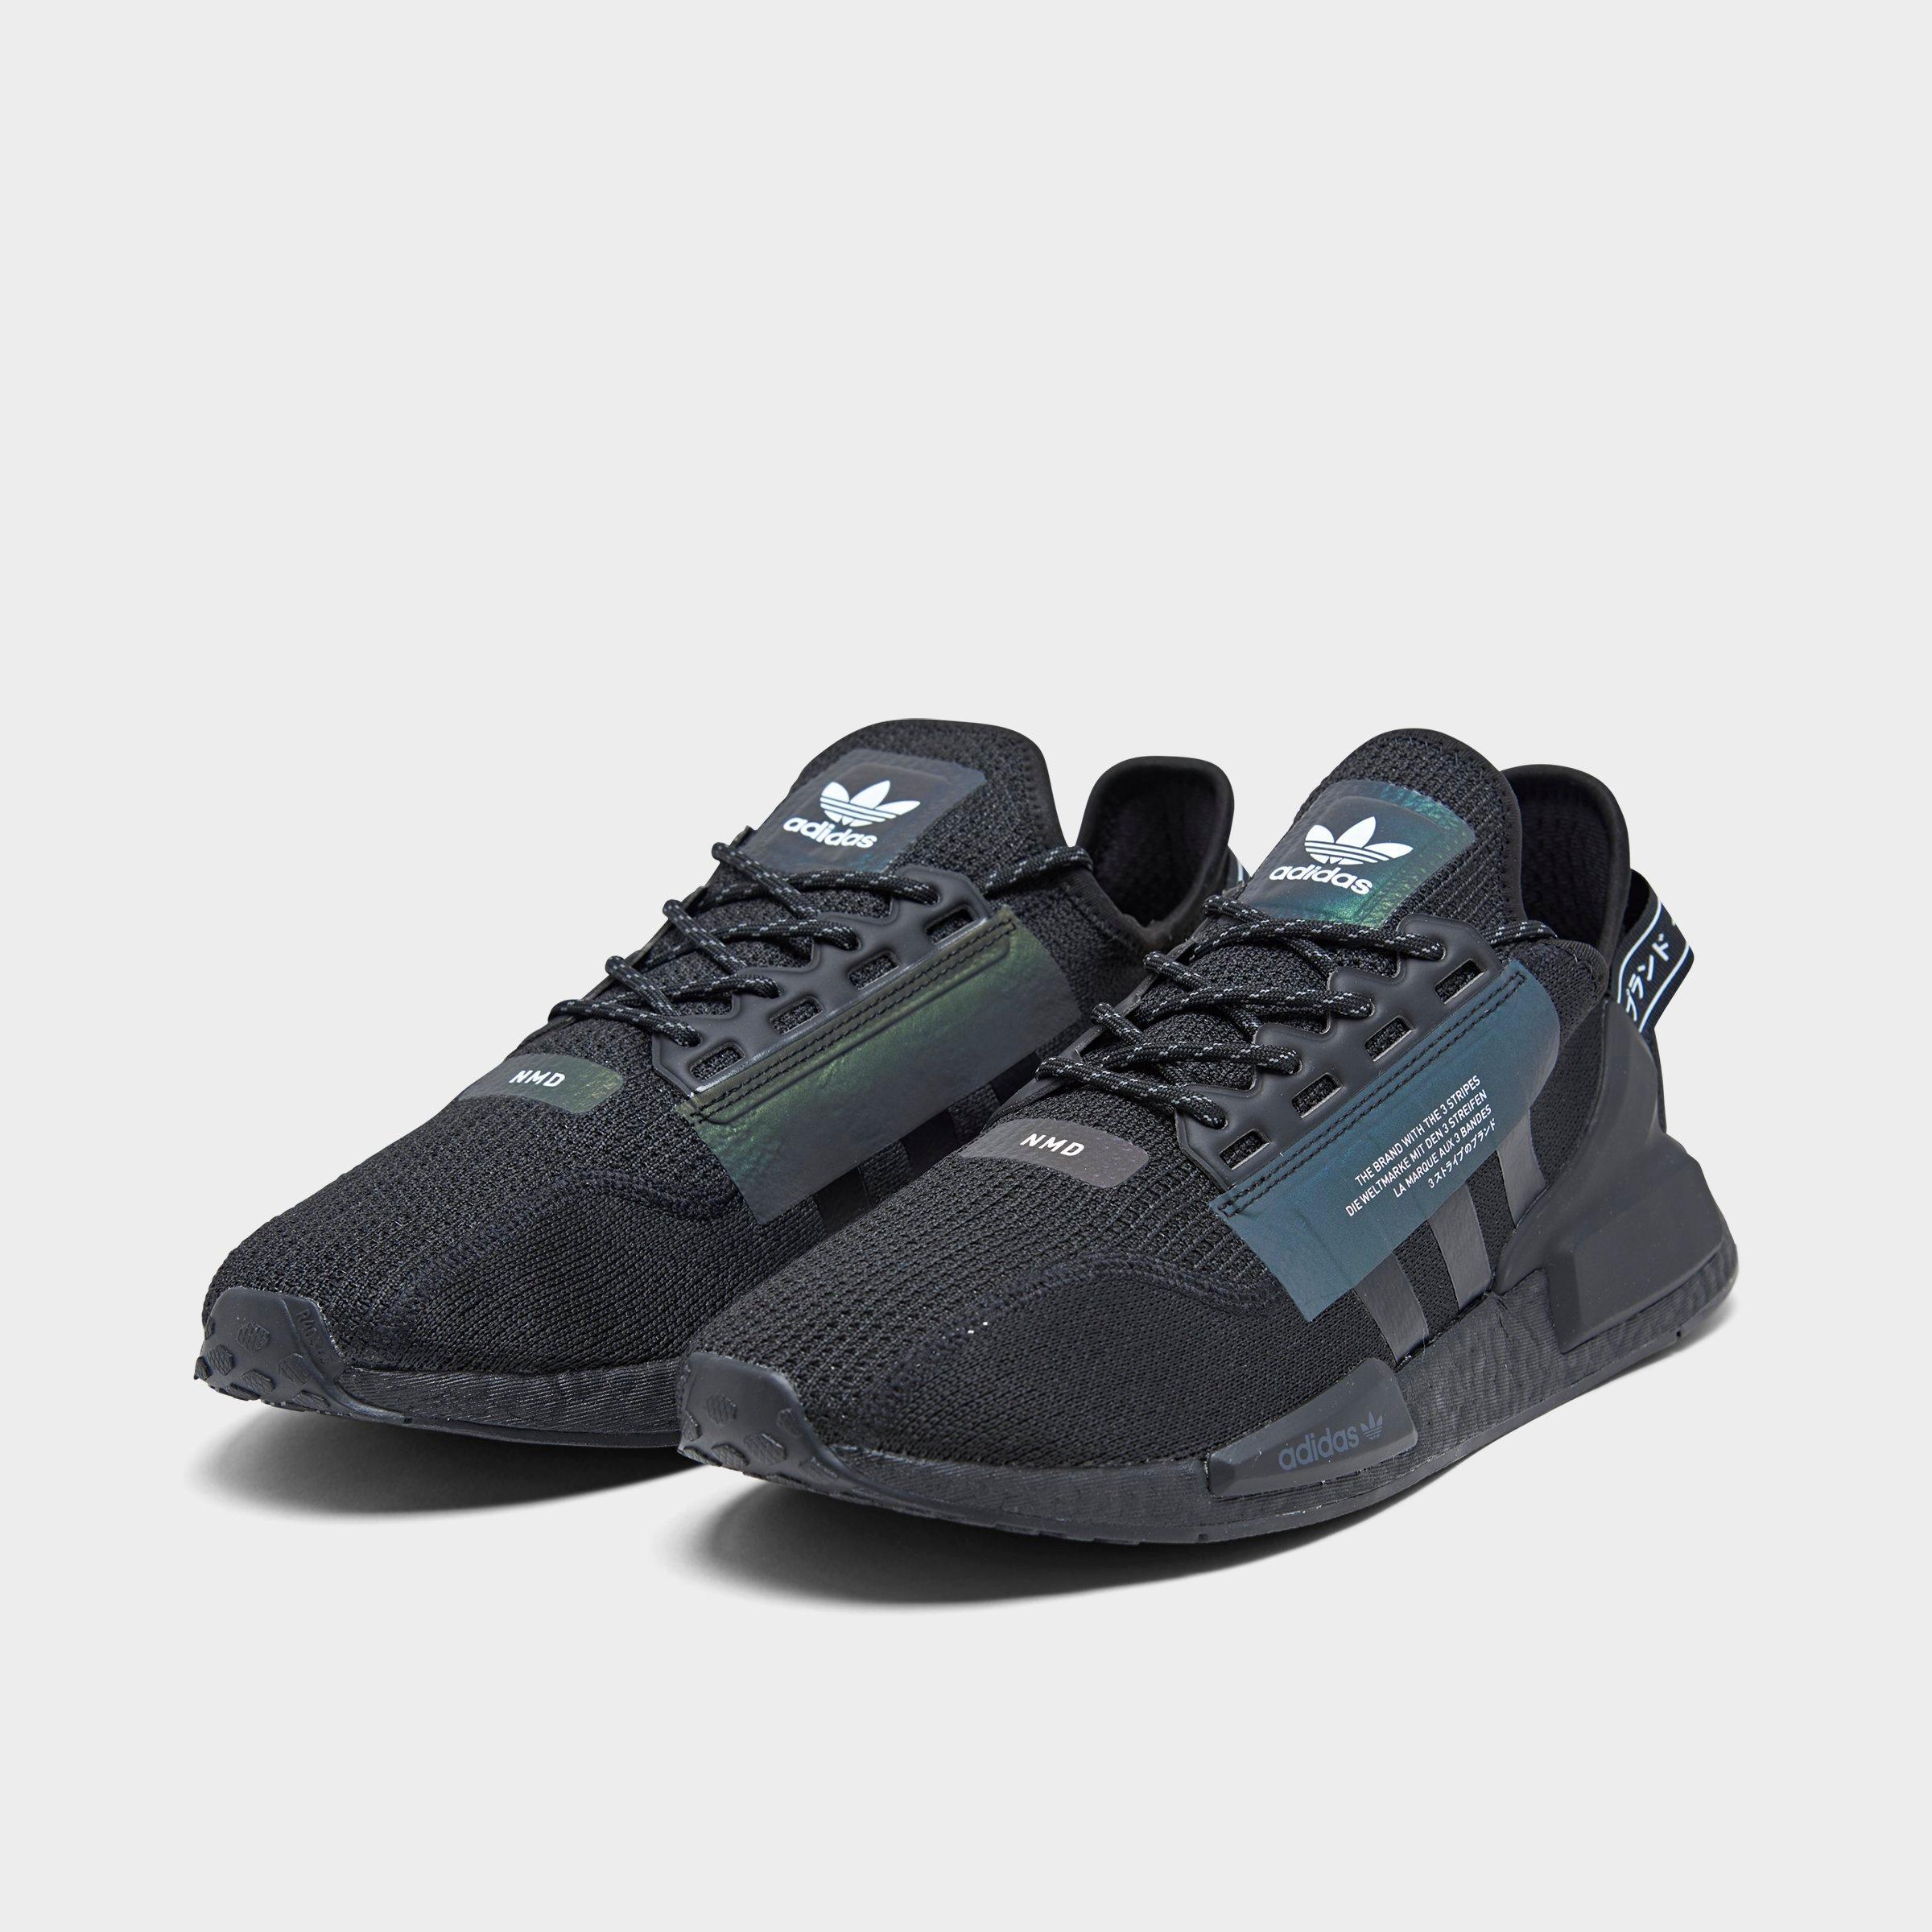 adidas NMD R1 Primeknit PK AND Core Black S79168 7 for